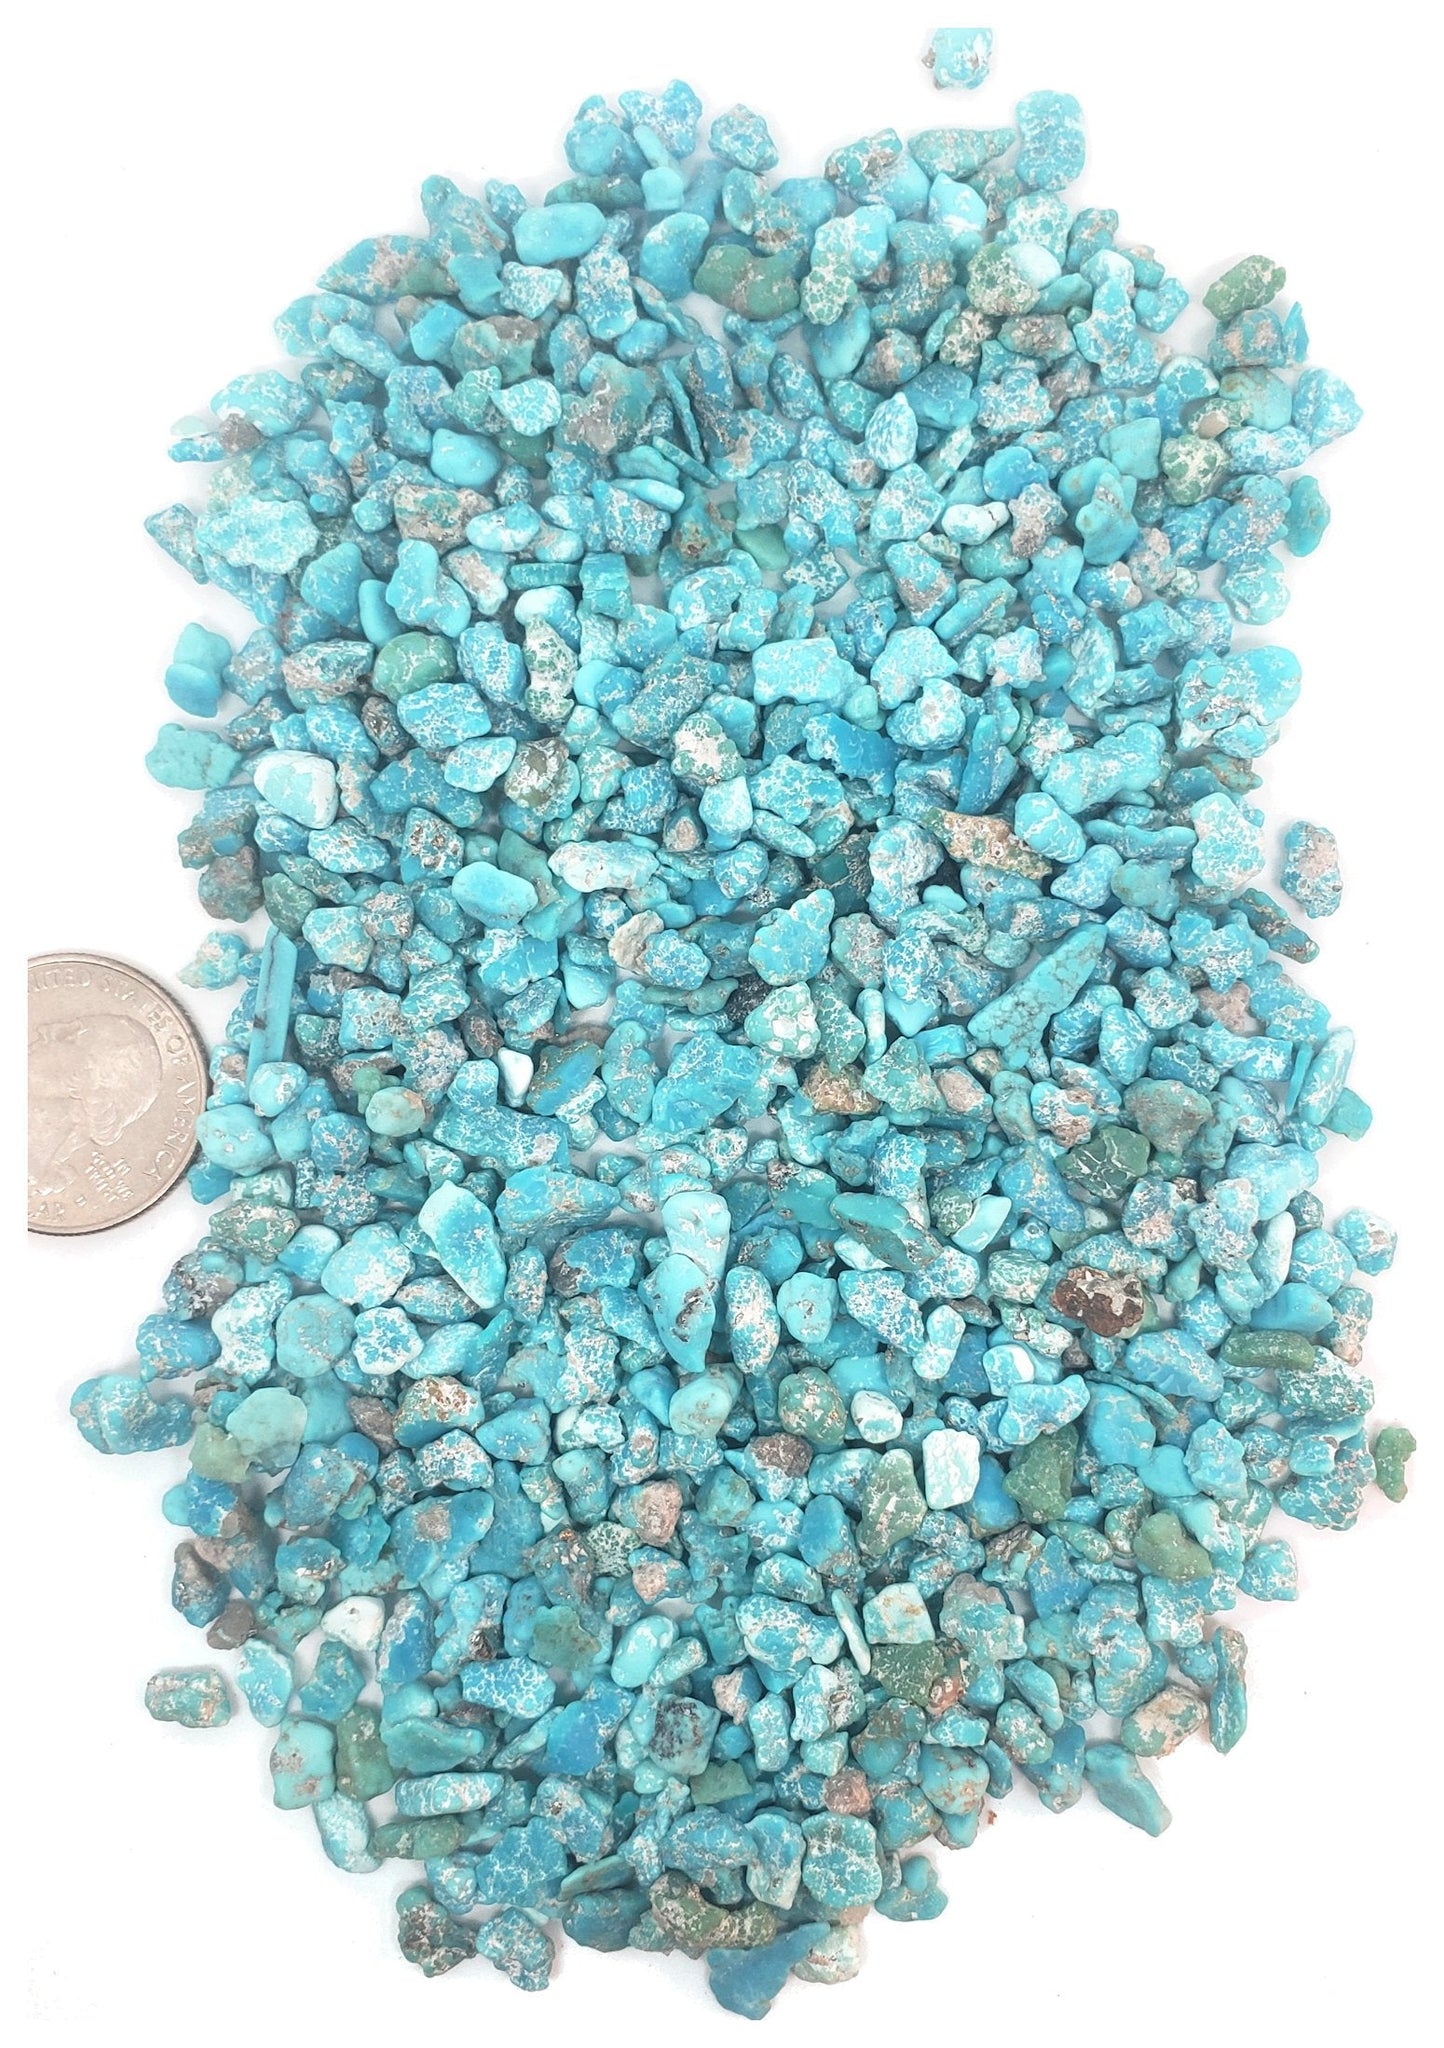 Bisbee 2 (Mex) Turquoise Unpolished Undrilled Nuggets (pkg